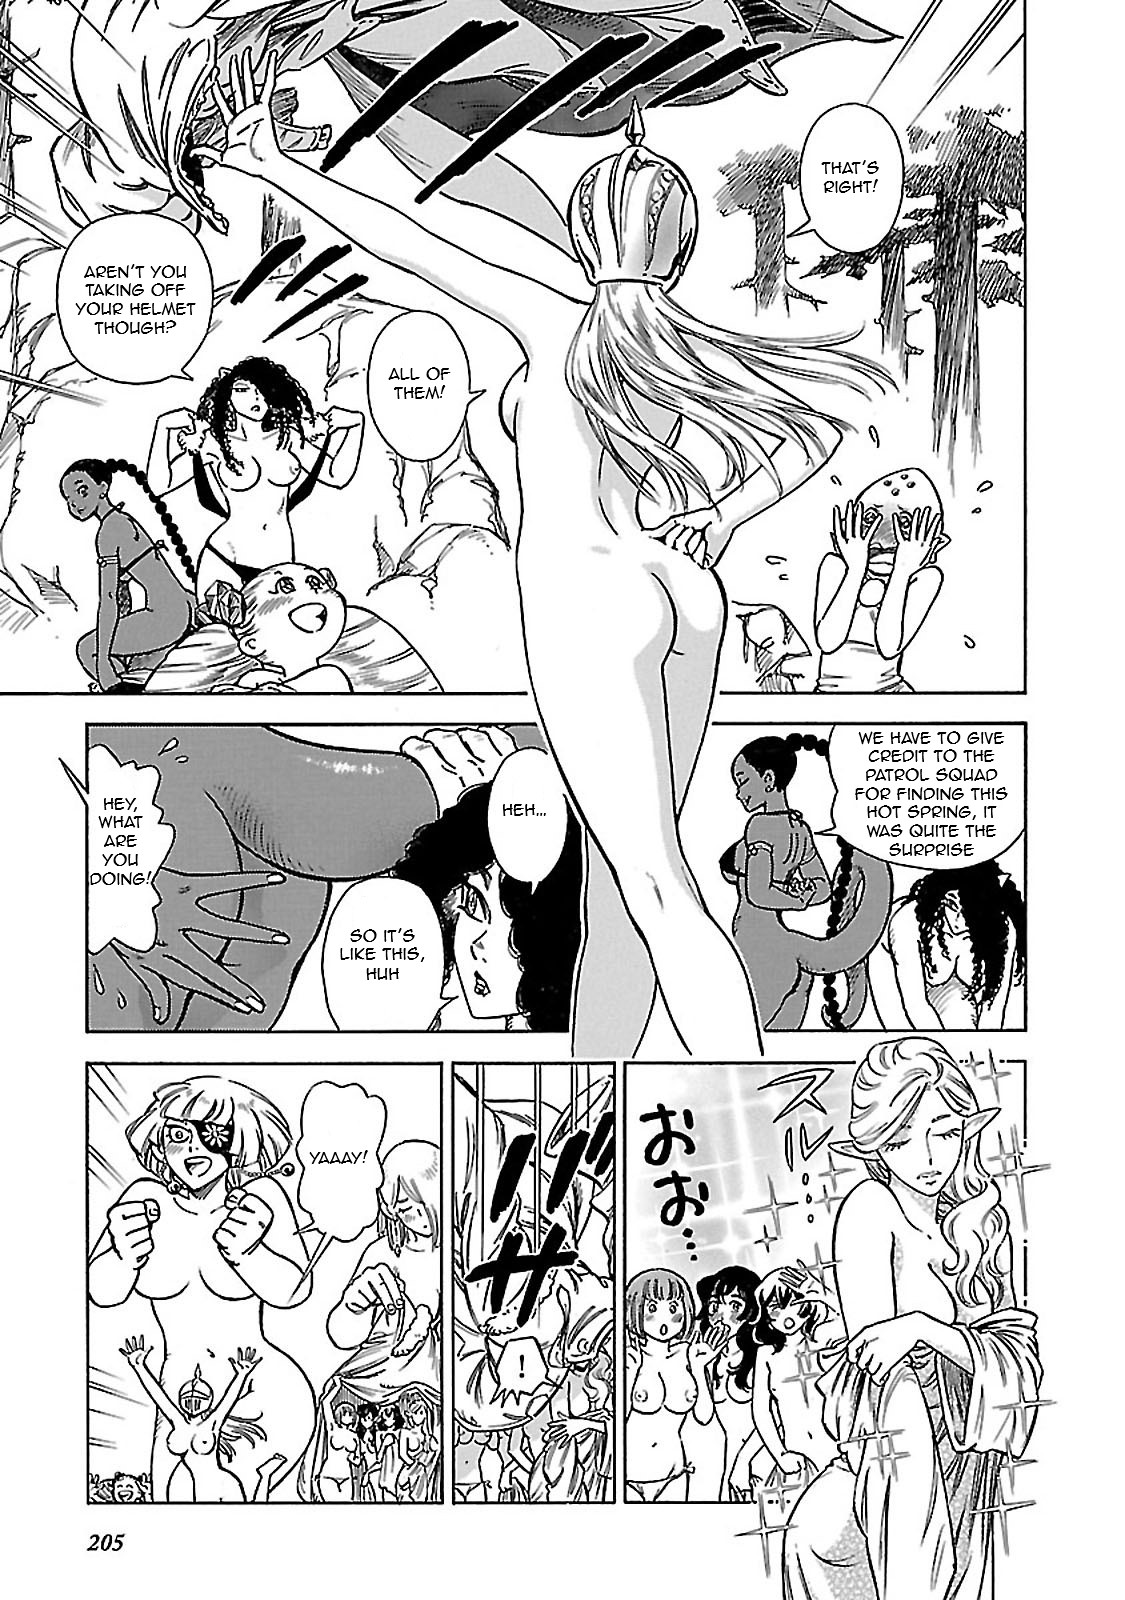 Stravaganza - Isai No Hime Vol.6 Chapter 34.5: Bath Time For The Queens - Picture 3